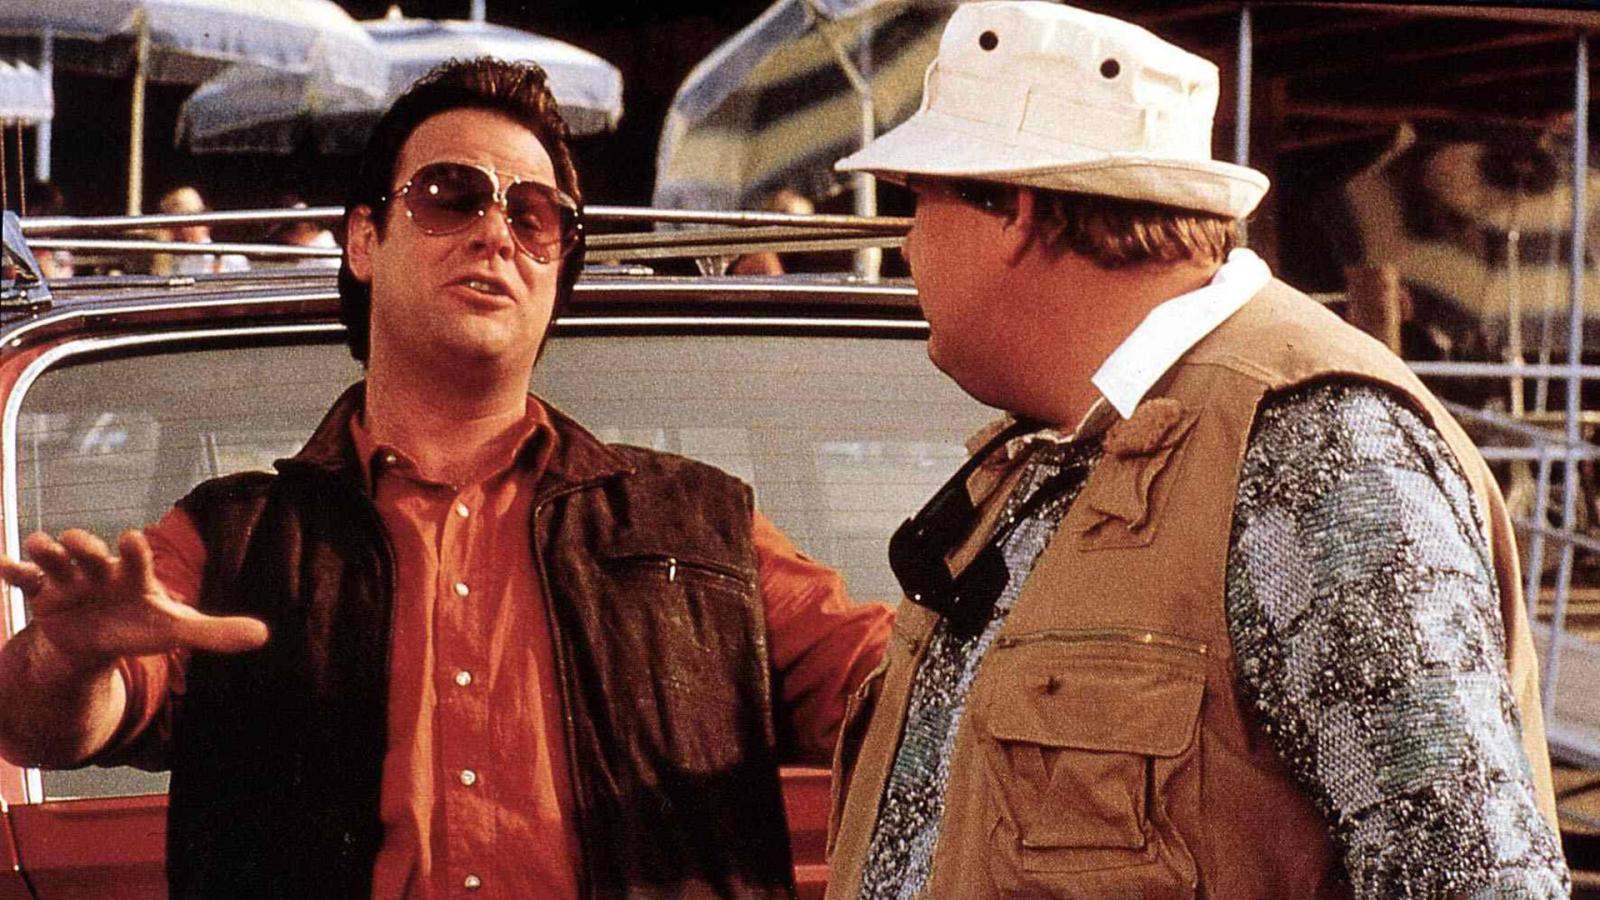 15 Most Underrated Comedy Movies of the 1980s, Ranked - image 4